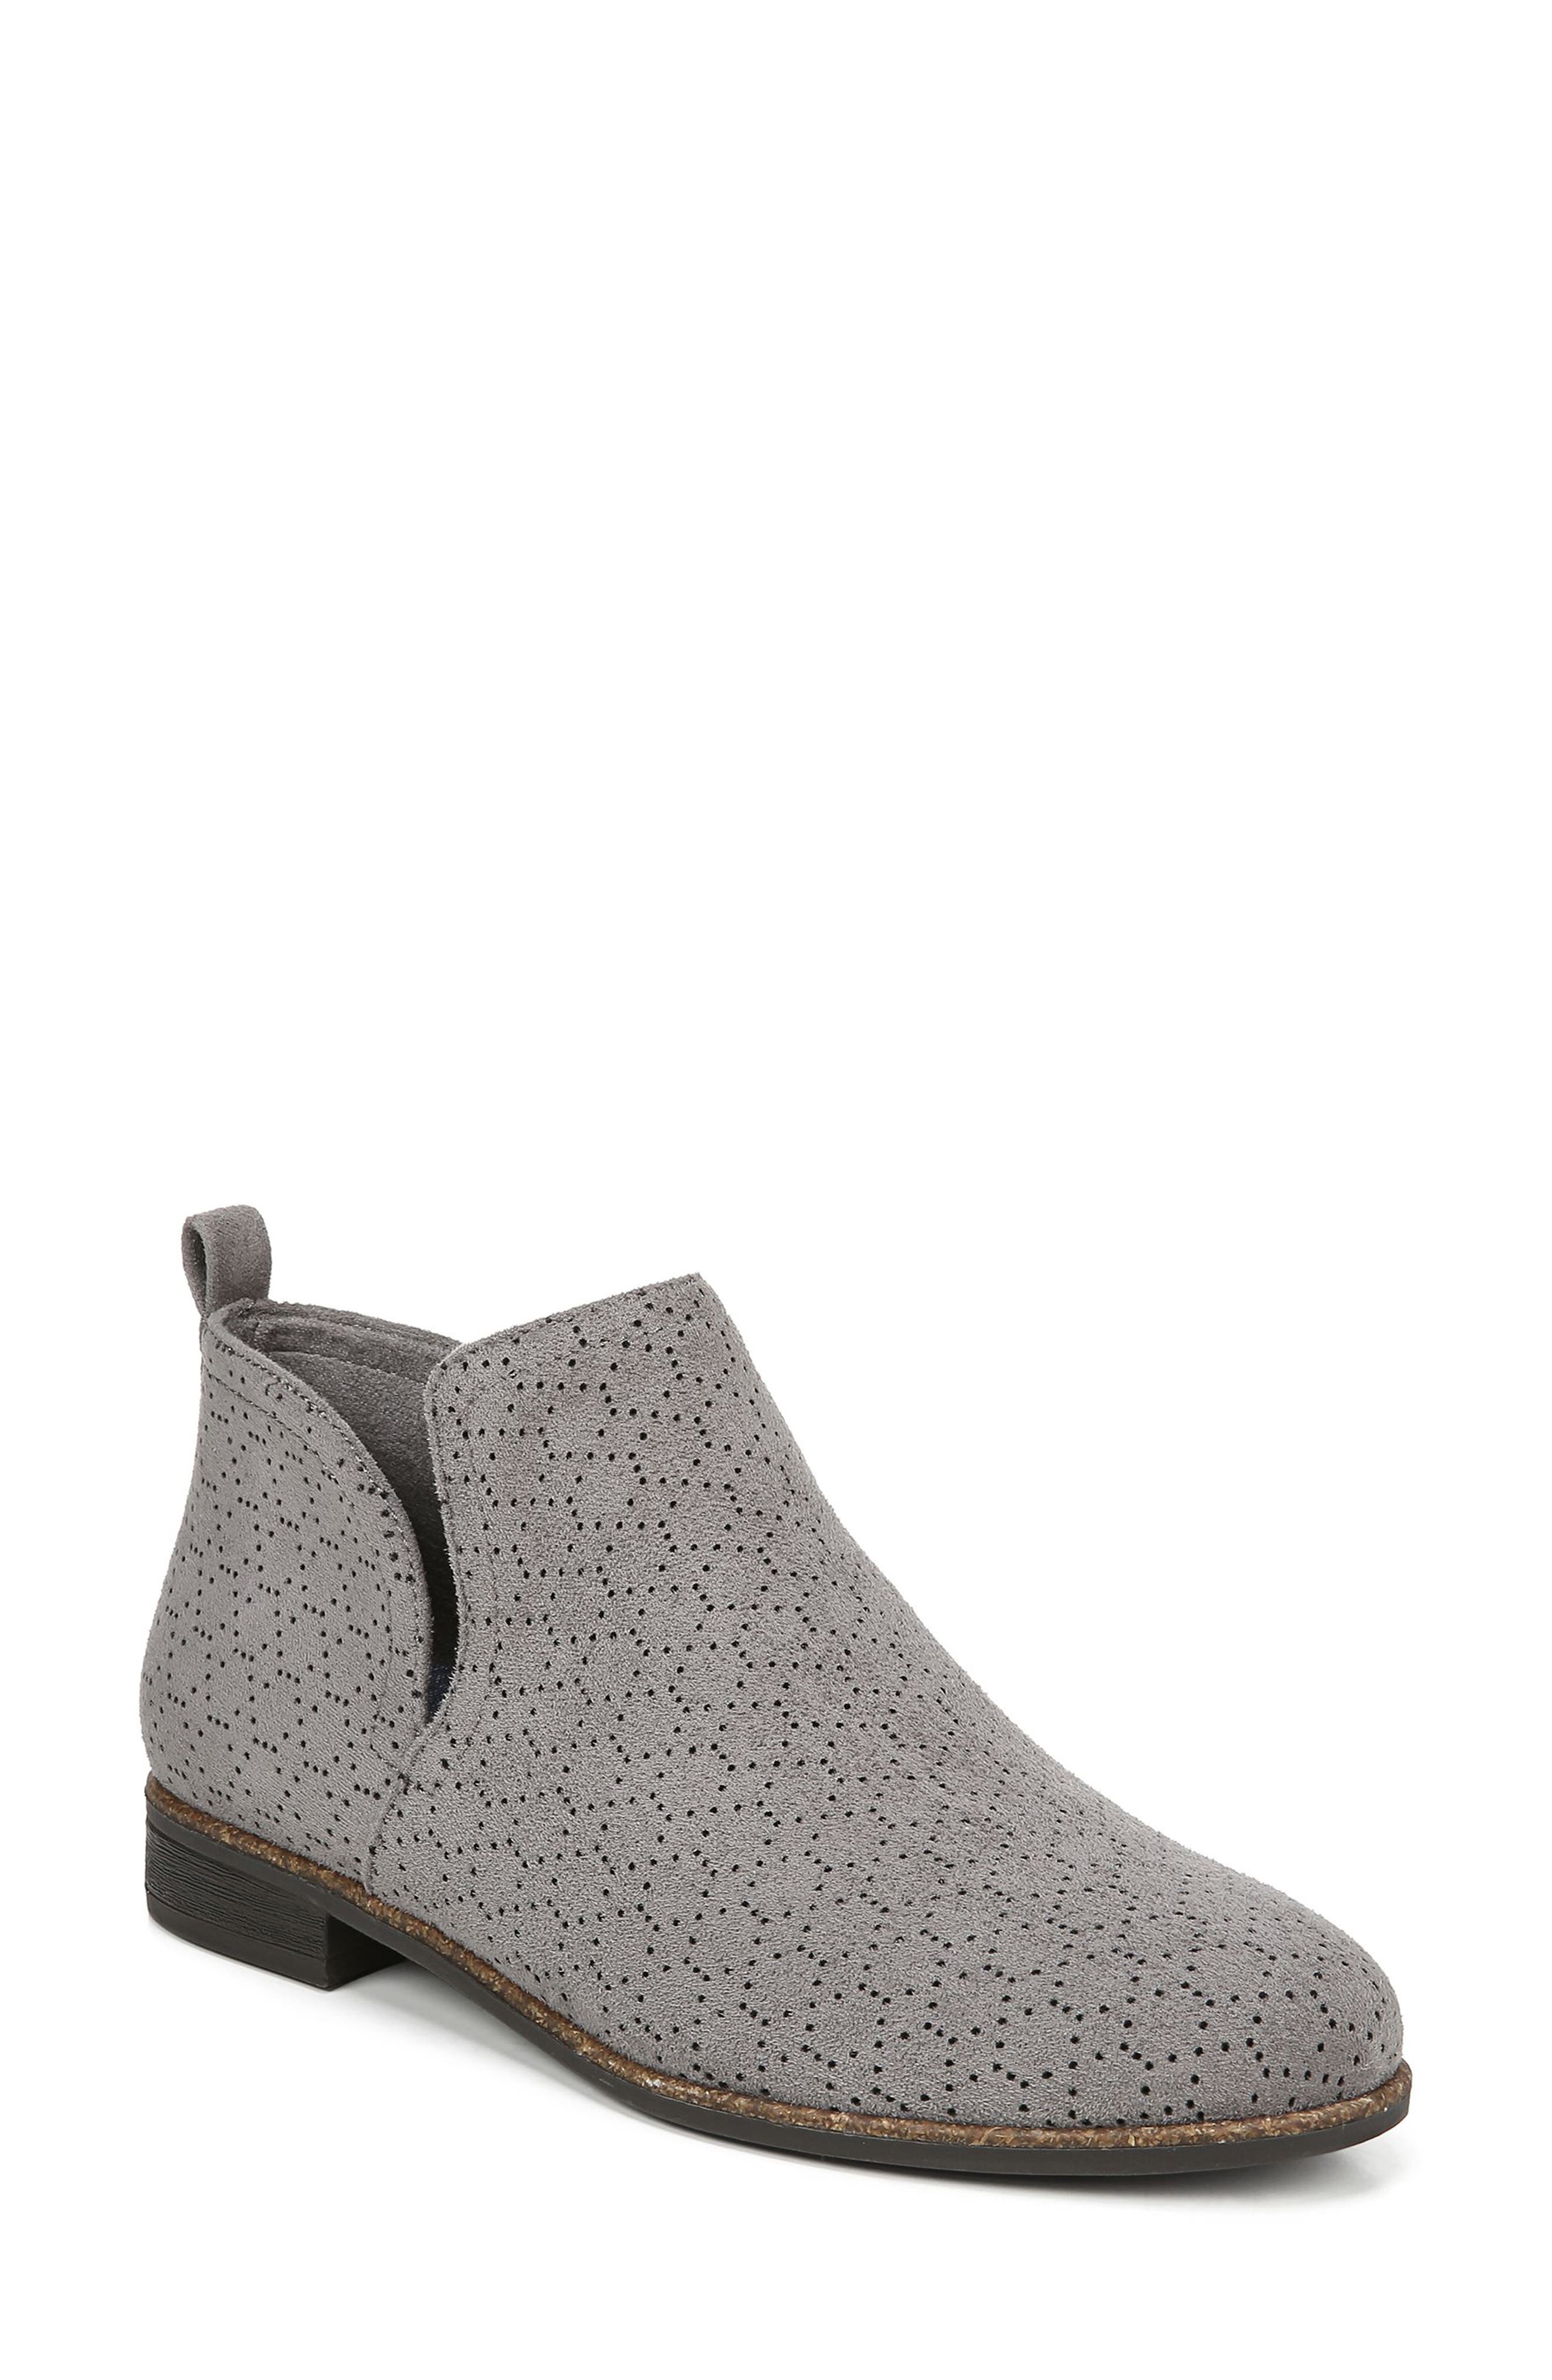 Dr. Scholl's | Rate Perforated Bootie 